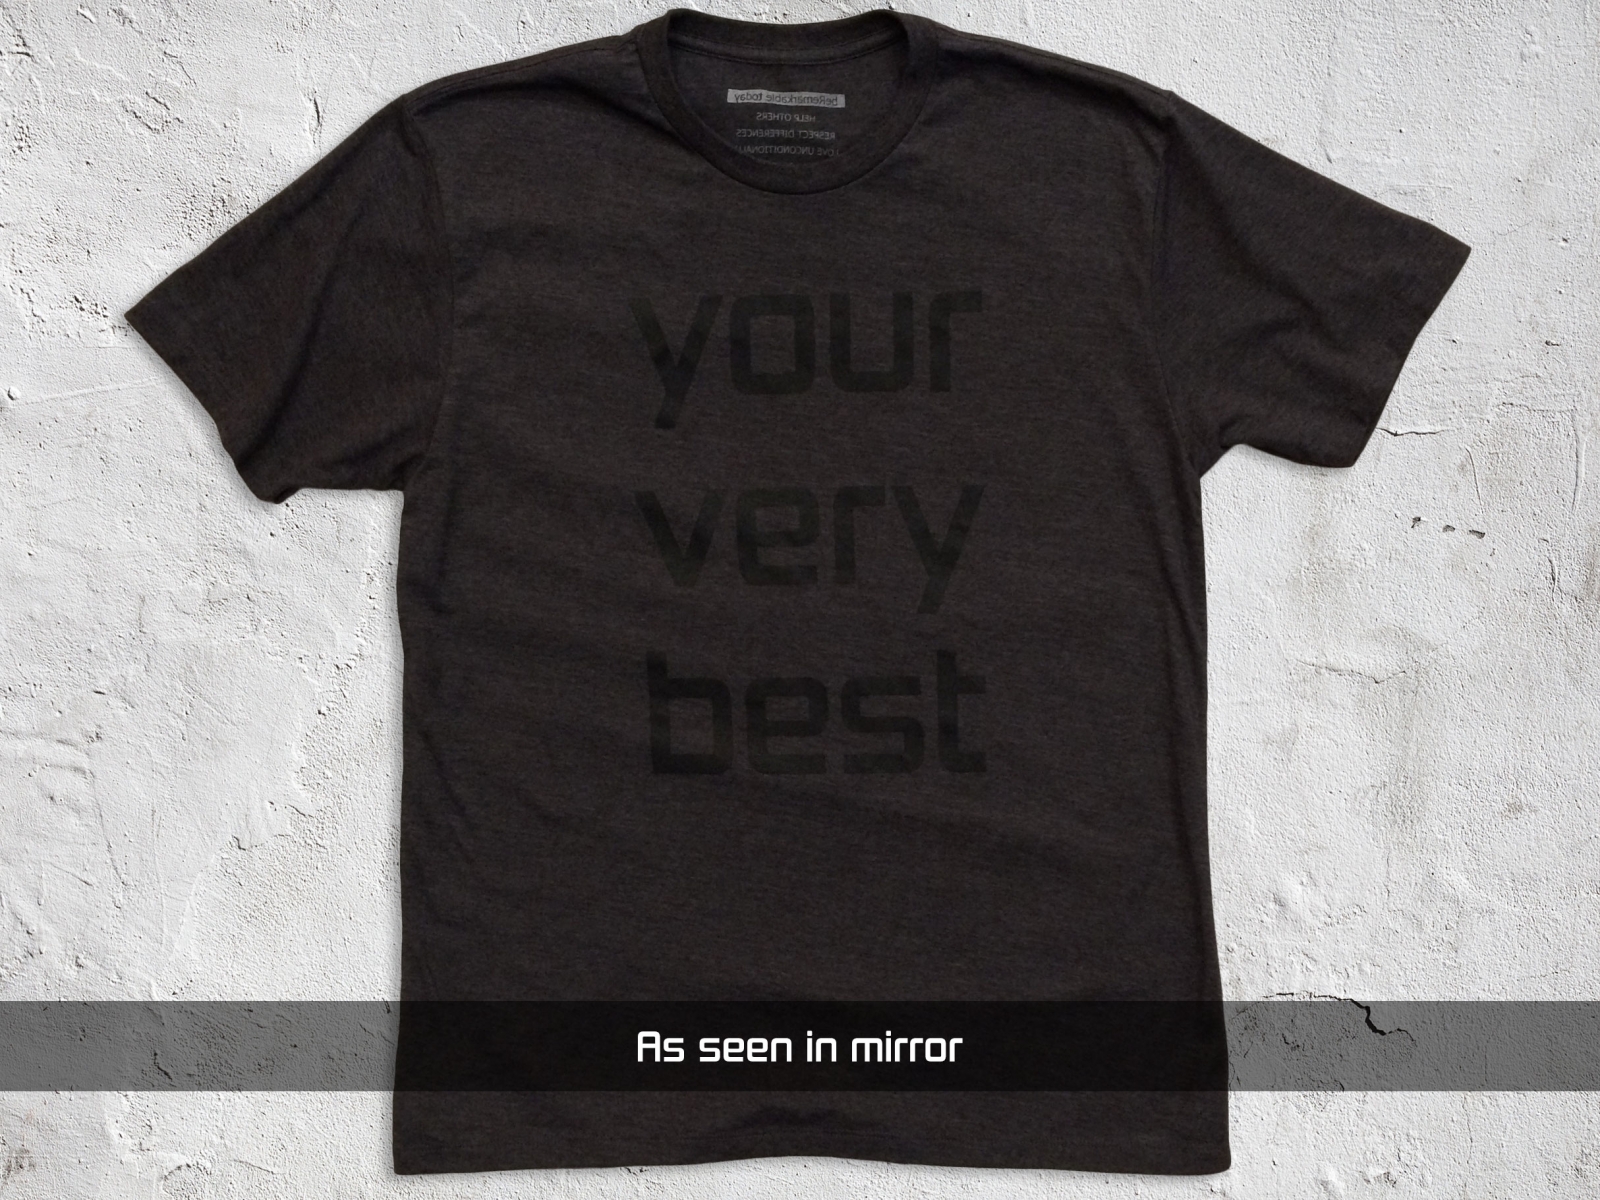 Your Very Best – Men’s Charcoal T-shirt (as seen in mirror)